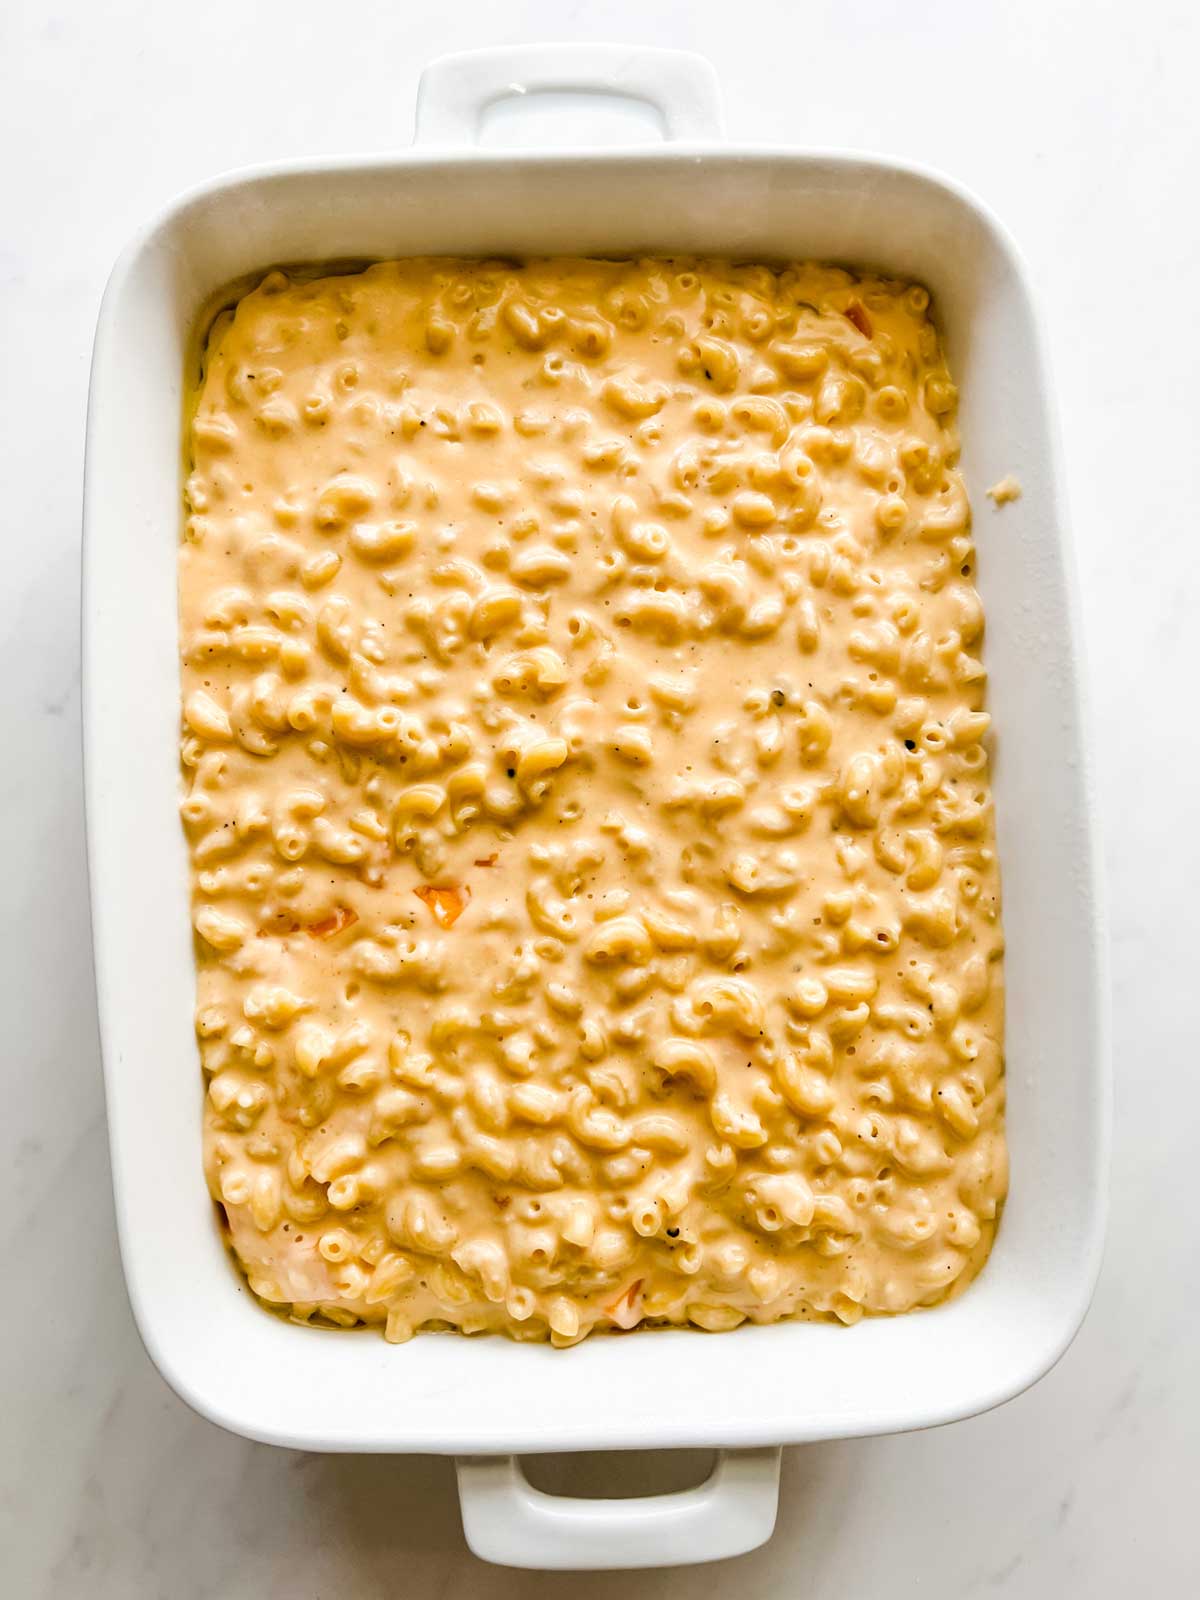 Macaroni and cheese in a casserole dish.